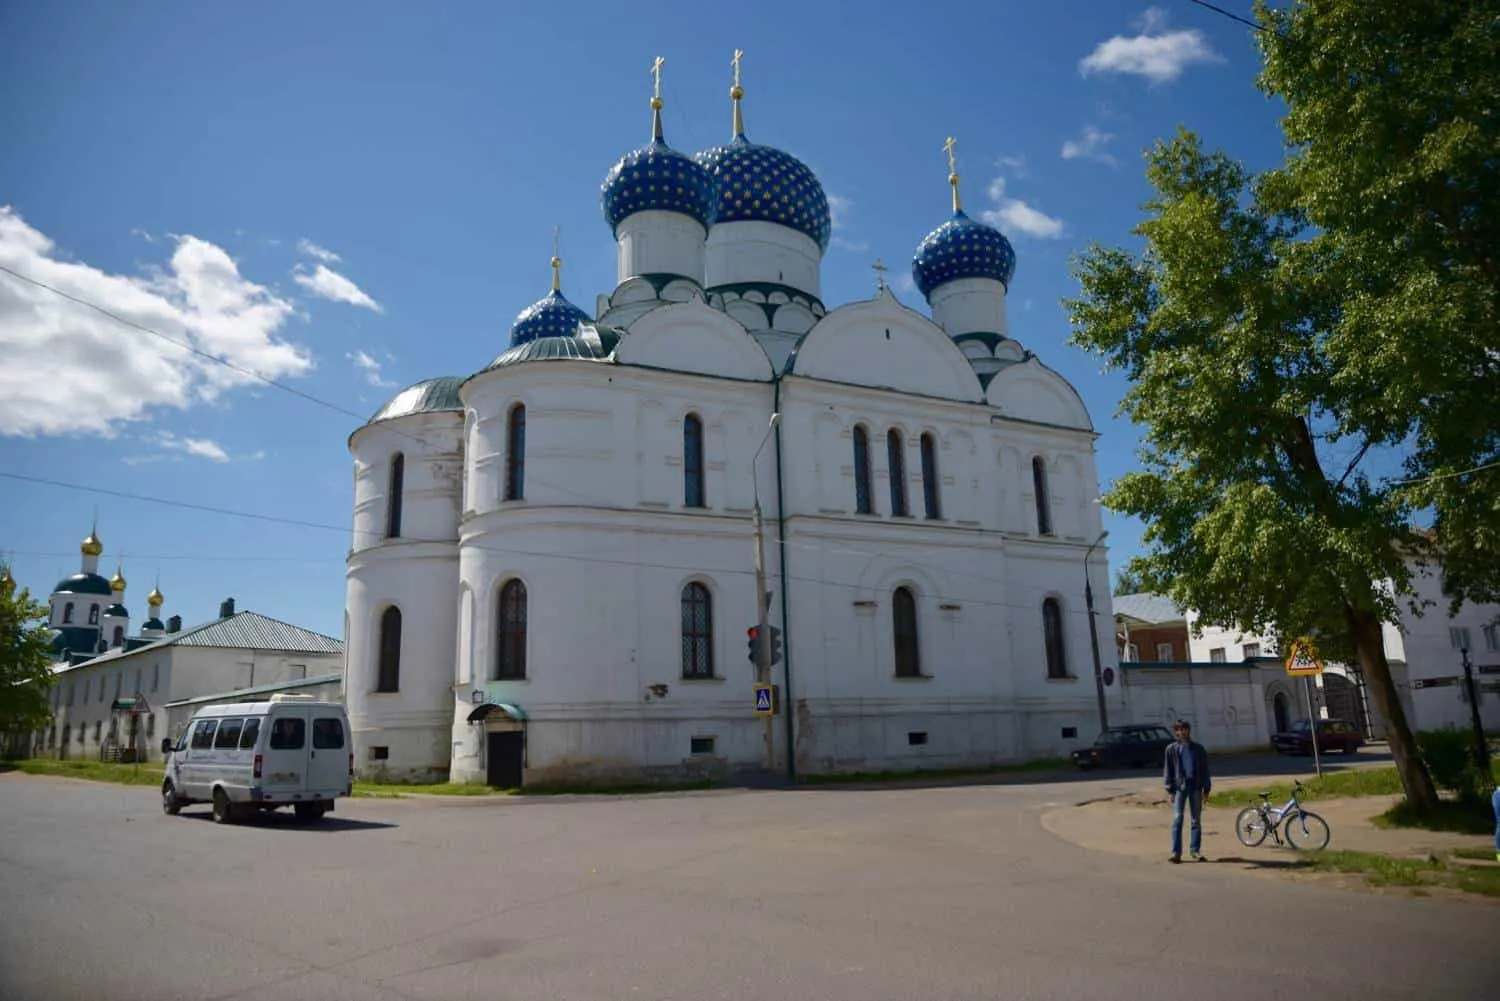 white church with 3 blue domes in Uglich Russia.  Best things to do in russia are from st petersburg to moscow